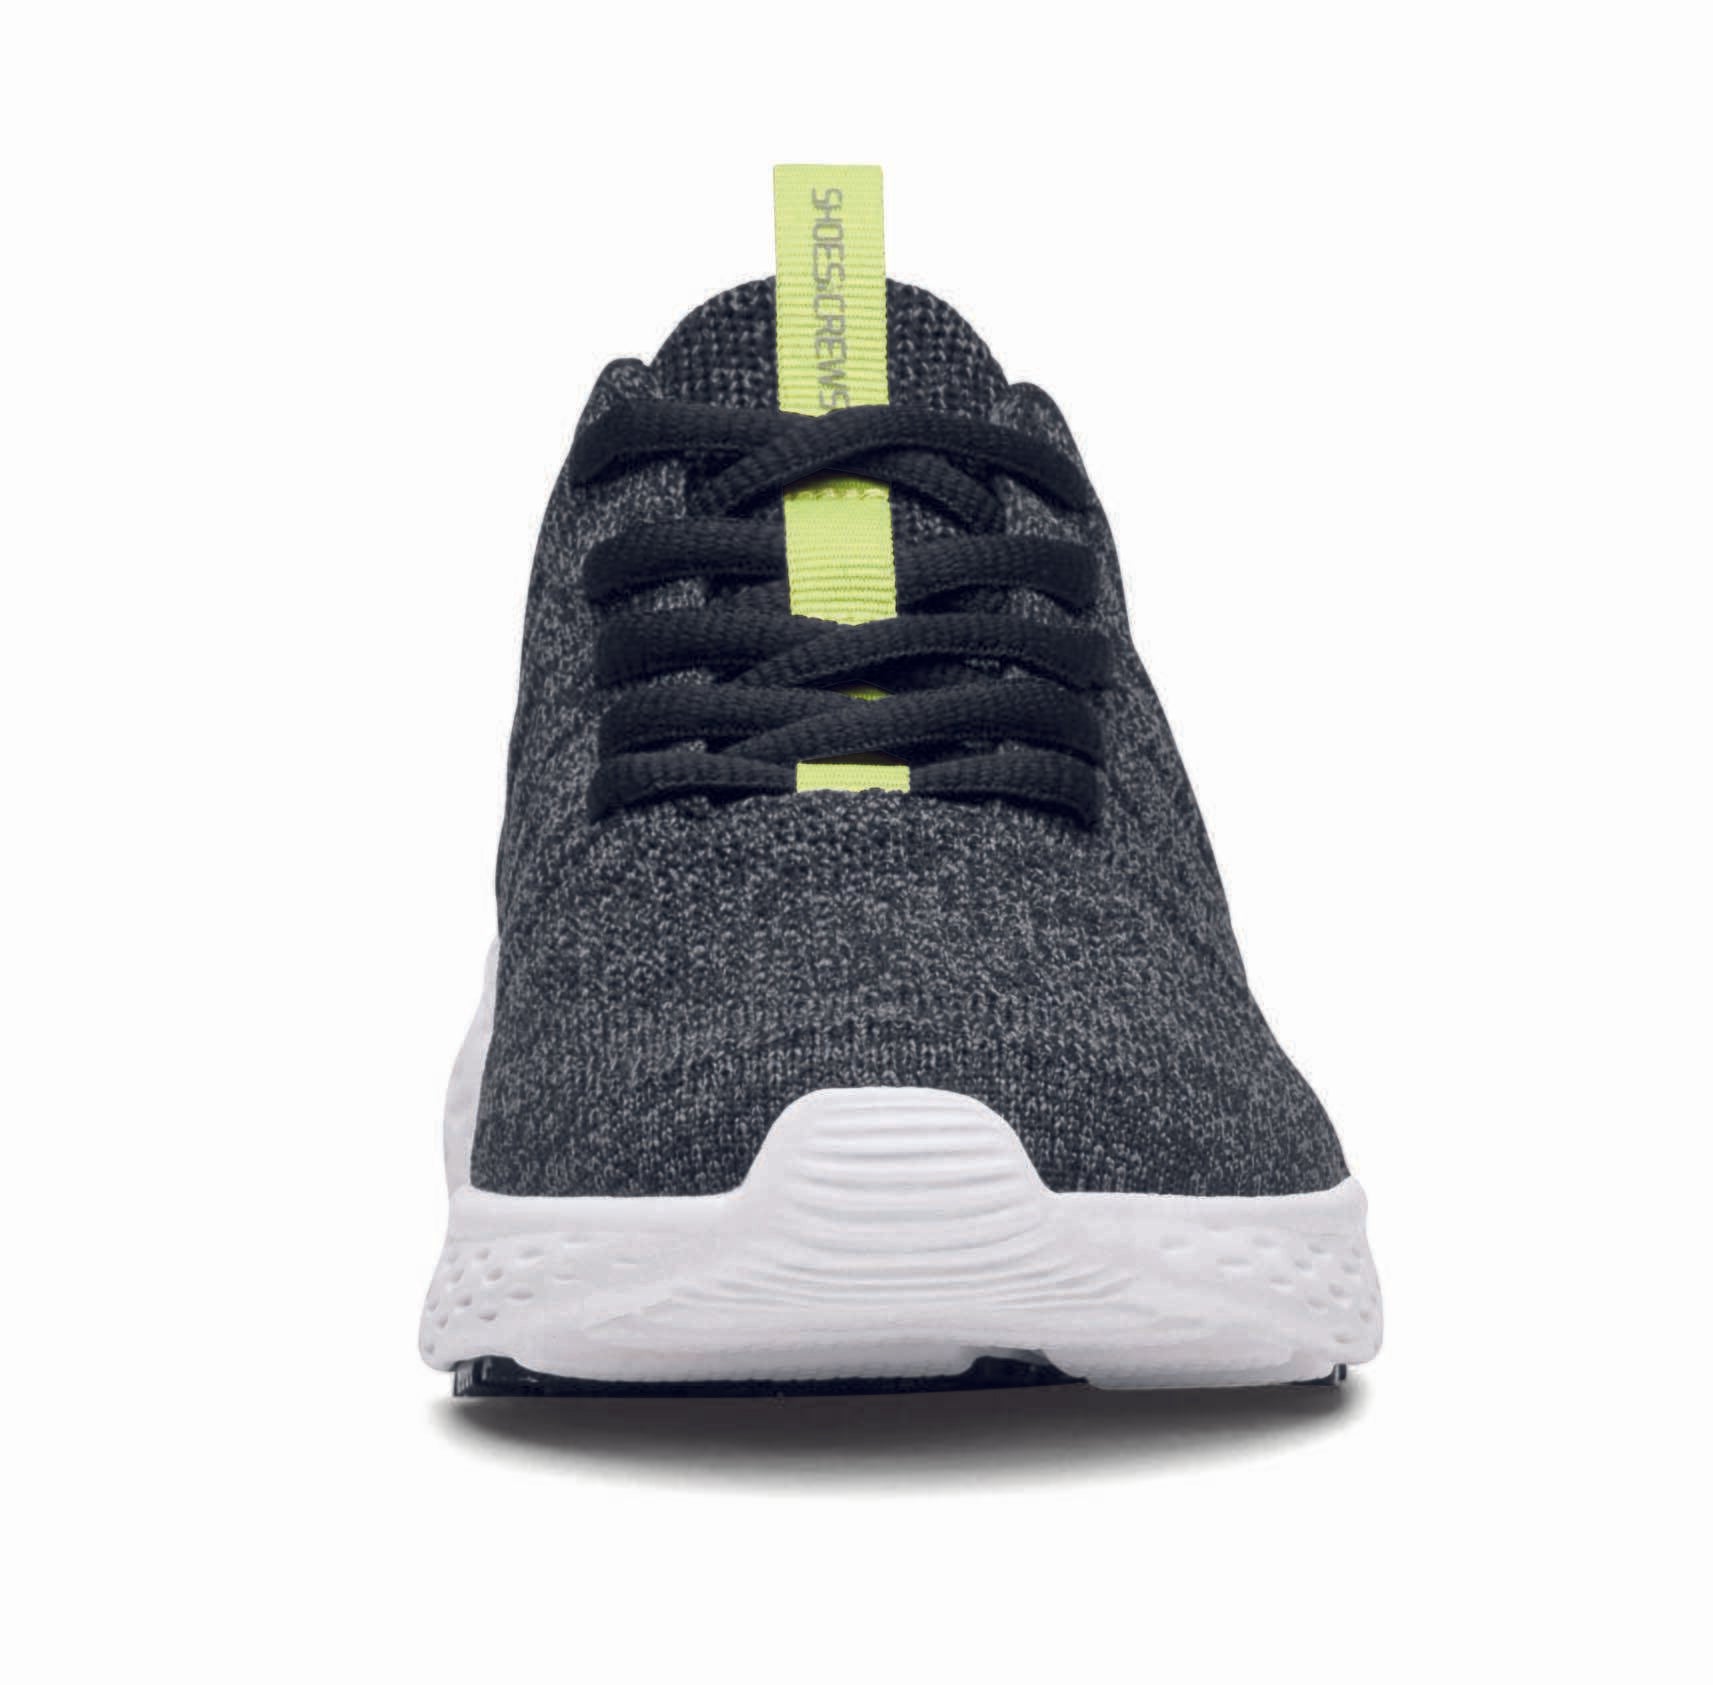 The Everlight™ ECO Womens Black/Grey from Shoes For Crews are lightweight, breathable slip-resistant trainers made from recycled materials, seen from the front.